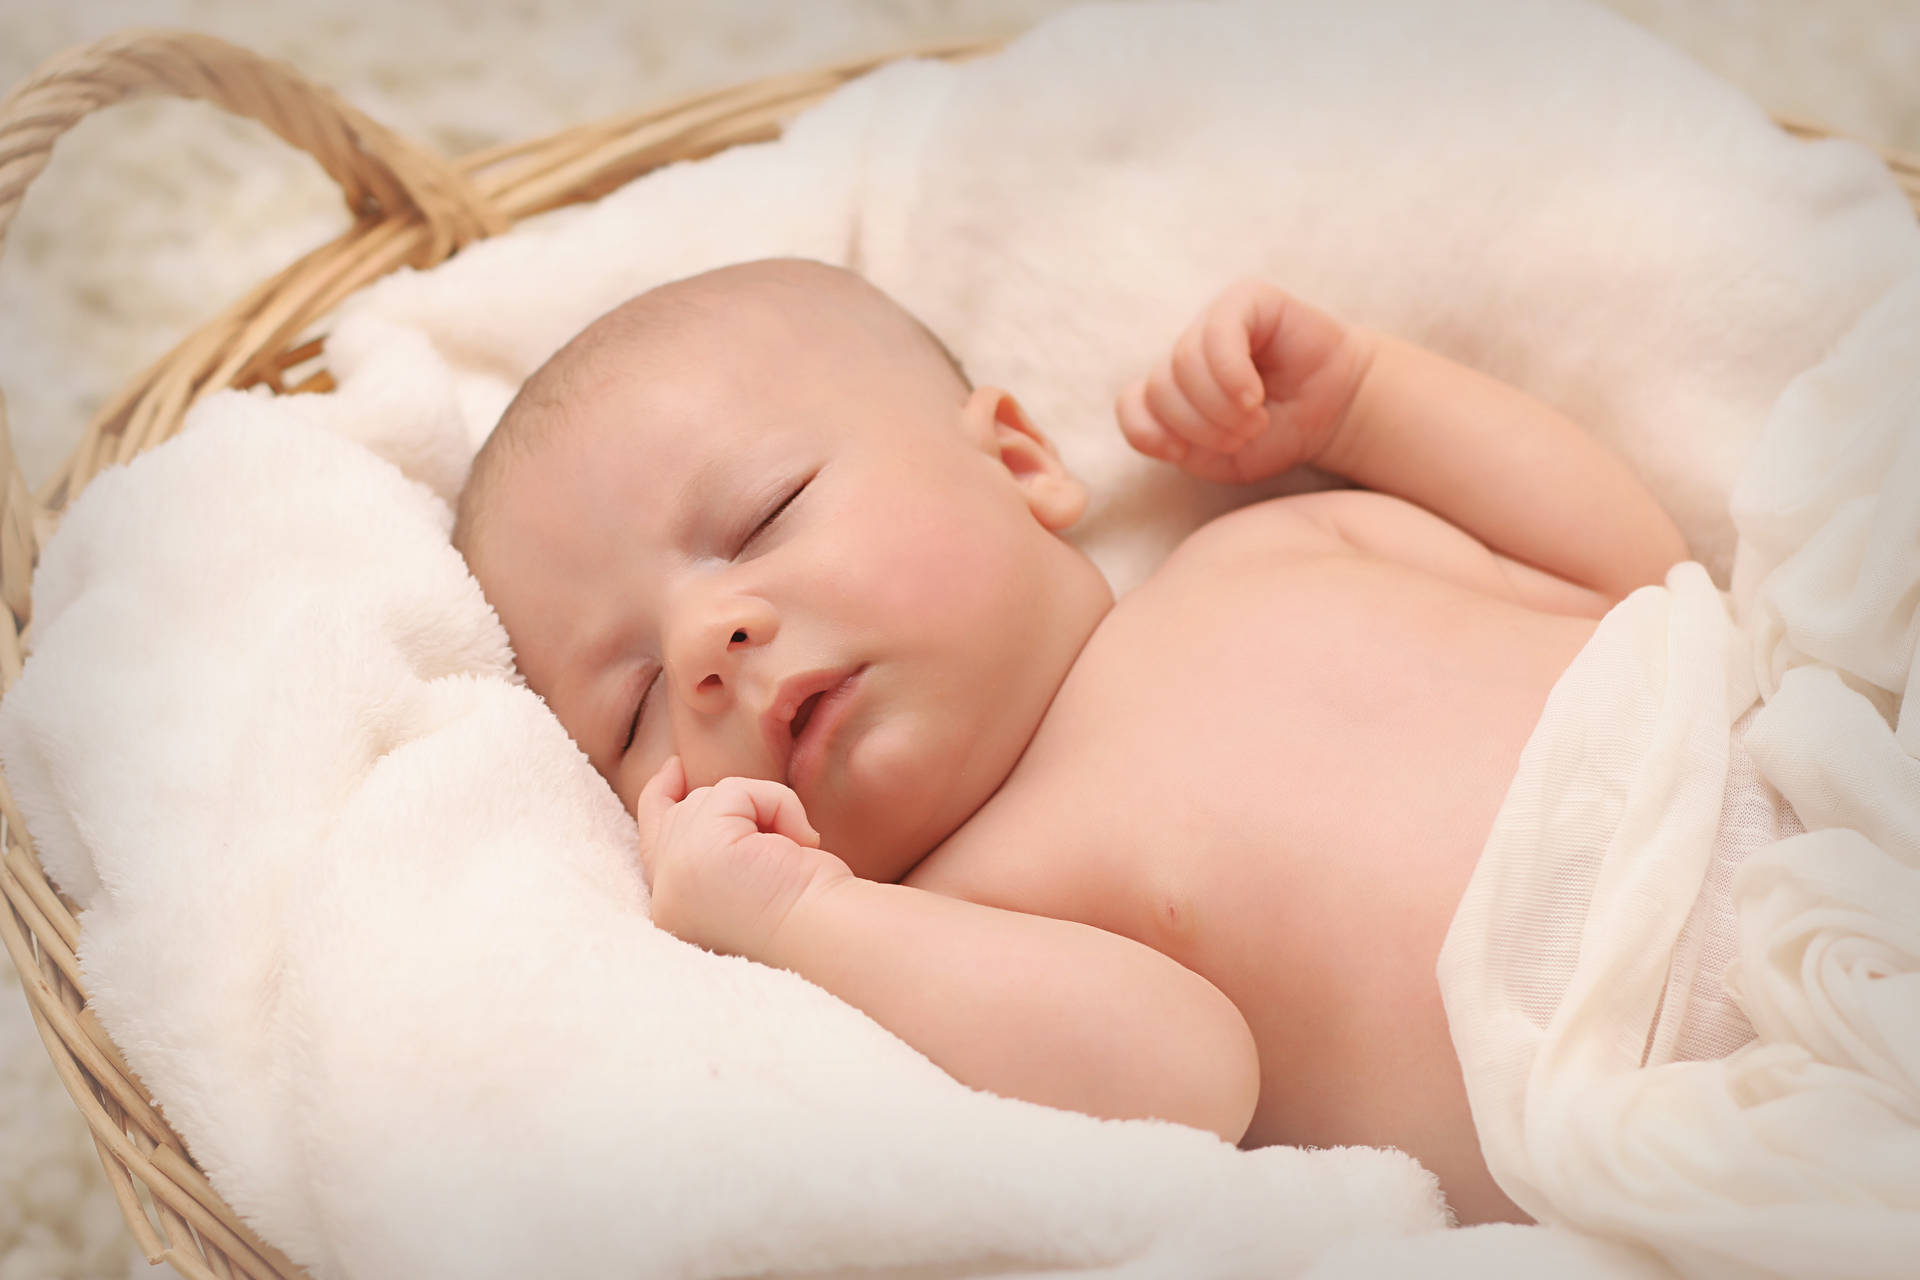 Free Cute Baby Wallpaper Downloads, [200+] Cute Baby Wallpapers for FREE |  